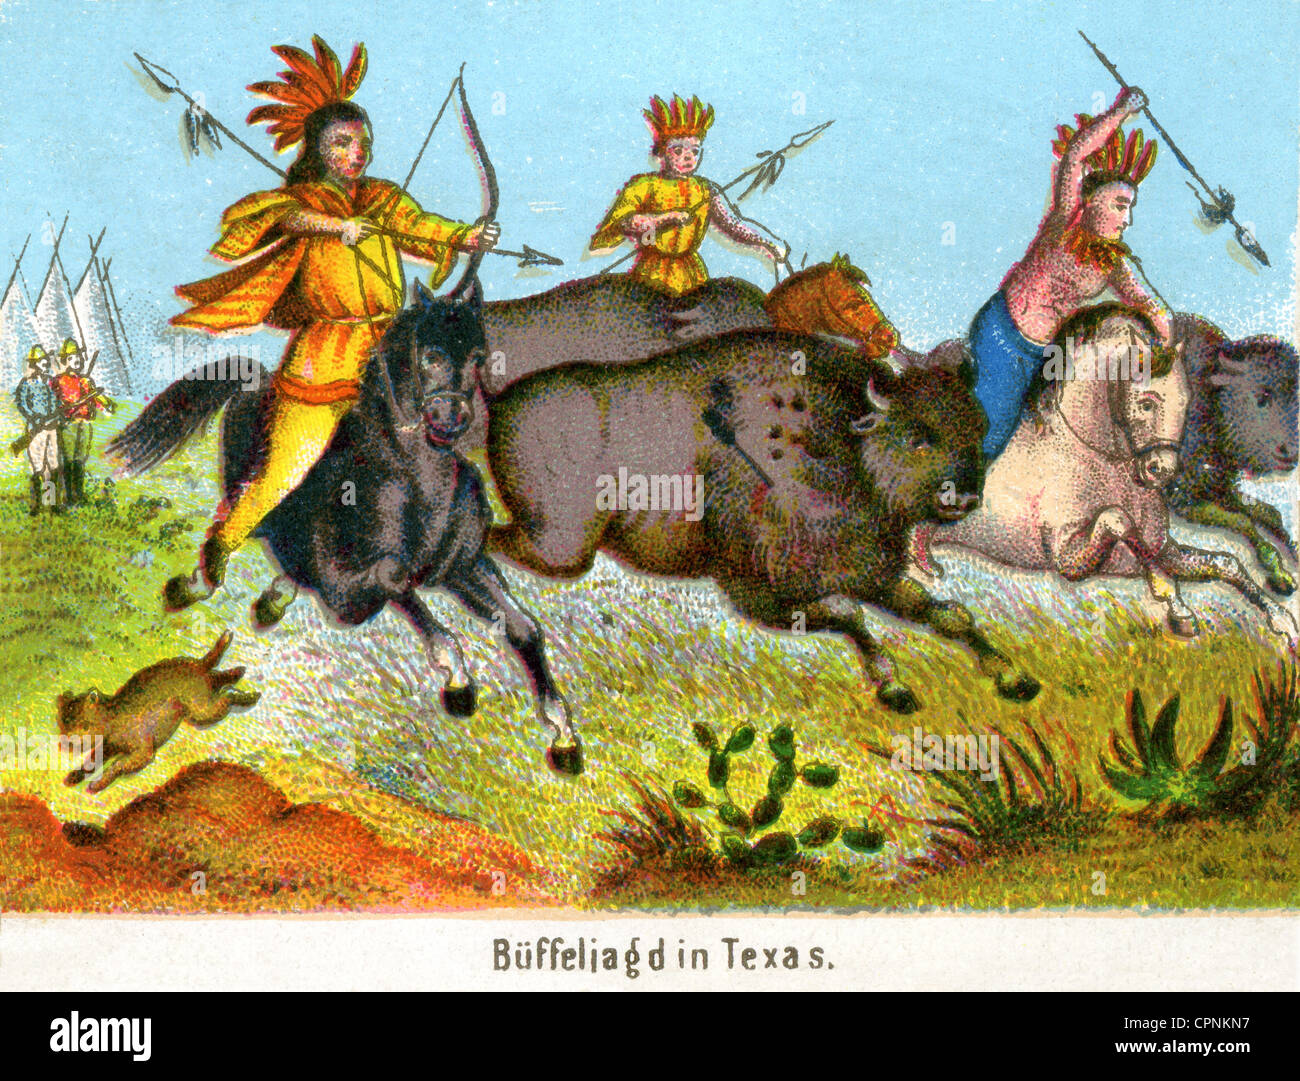 hunt, buffalo hunt, in Texas, Red Indian with arrow and arch, lithograph, USA, circa 1860, Additional-Rights-Clearences-Not Available Stock Photo - Alamy